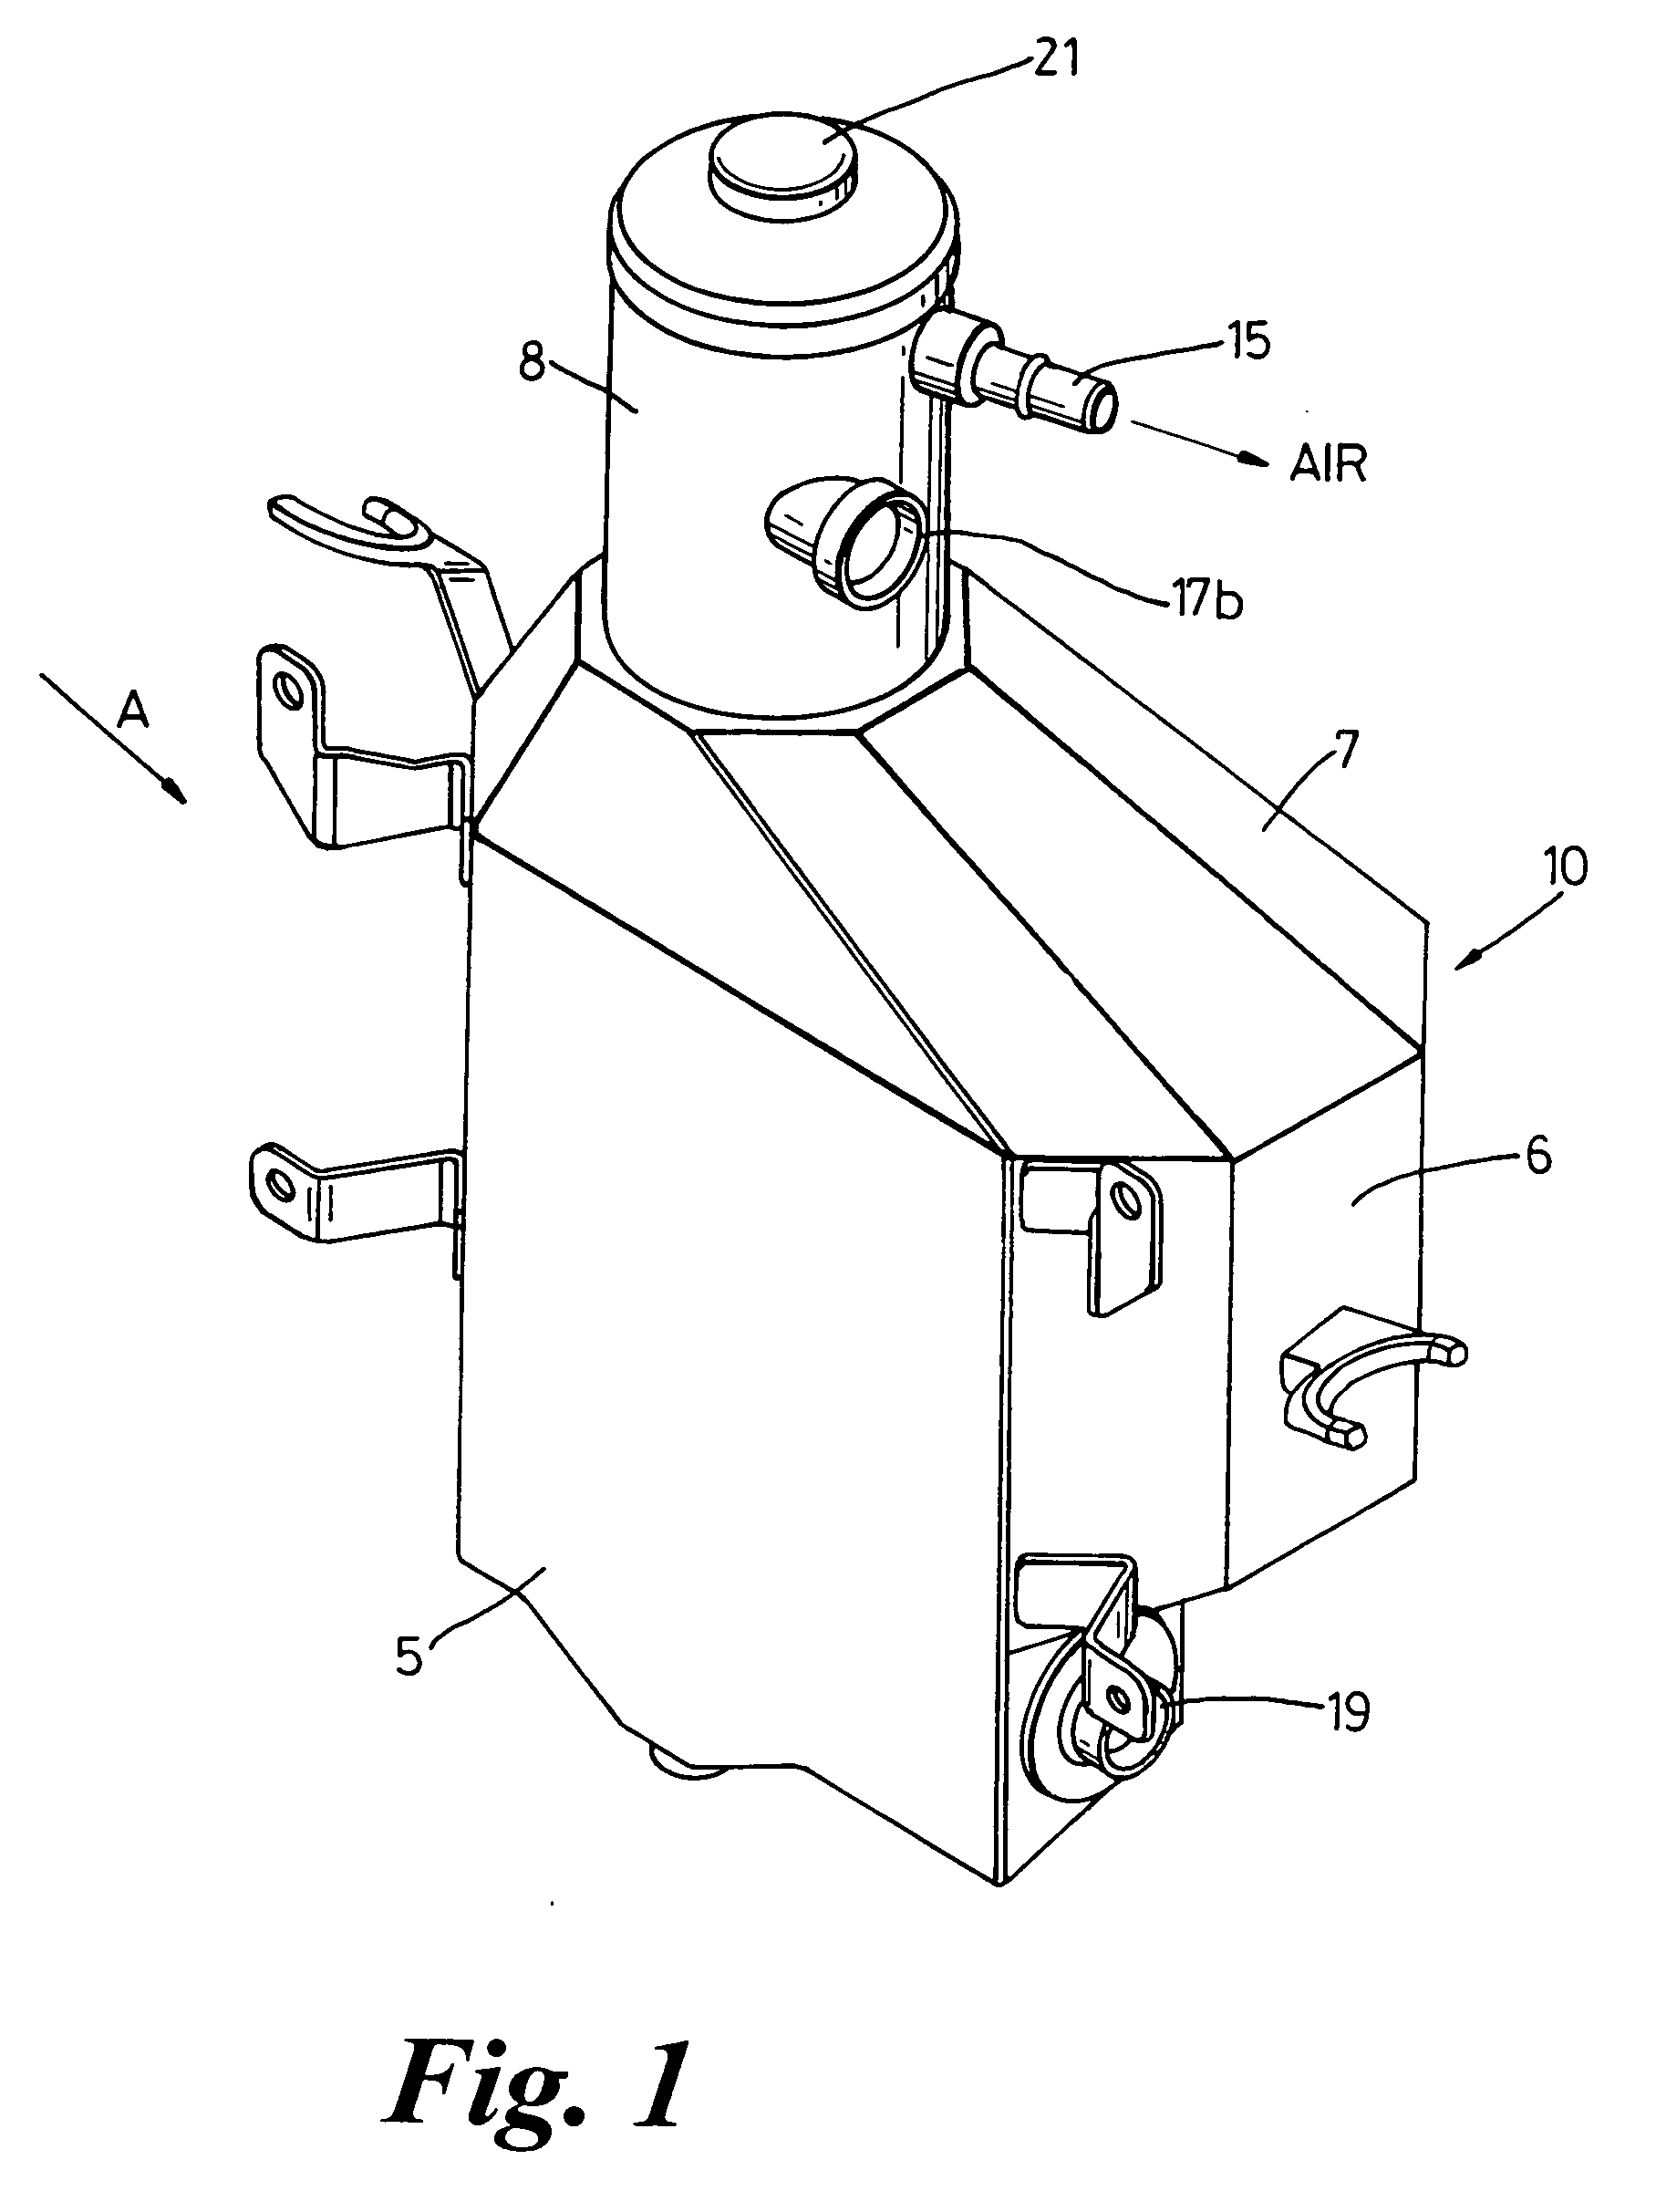 Oil tank for dry sump engines